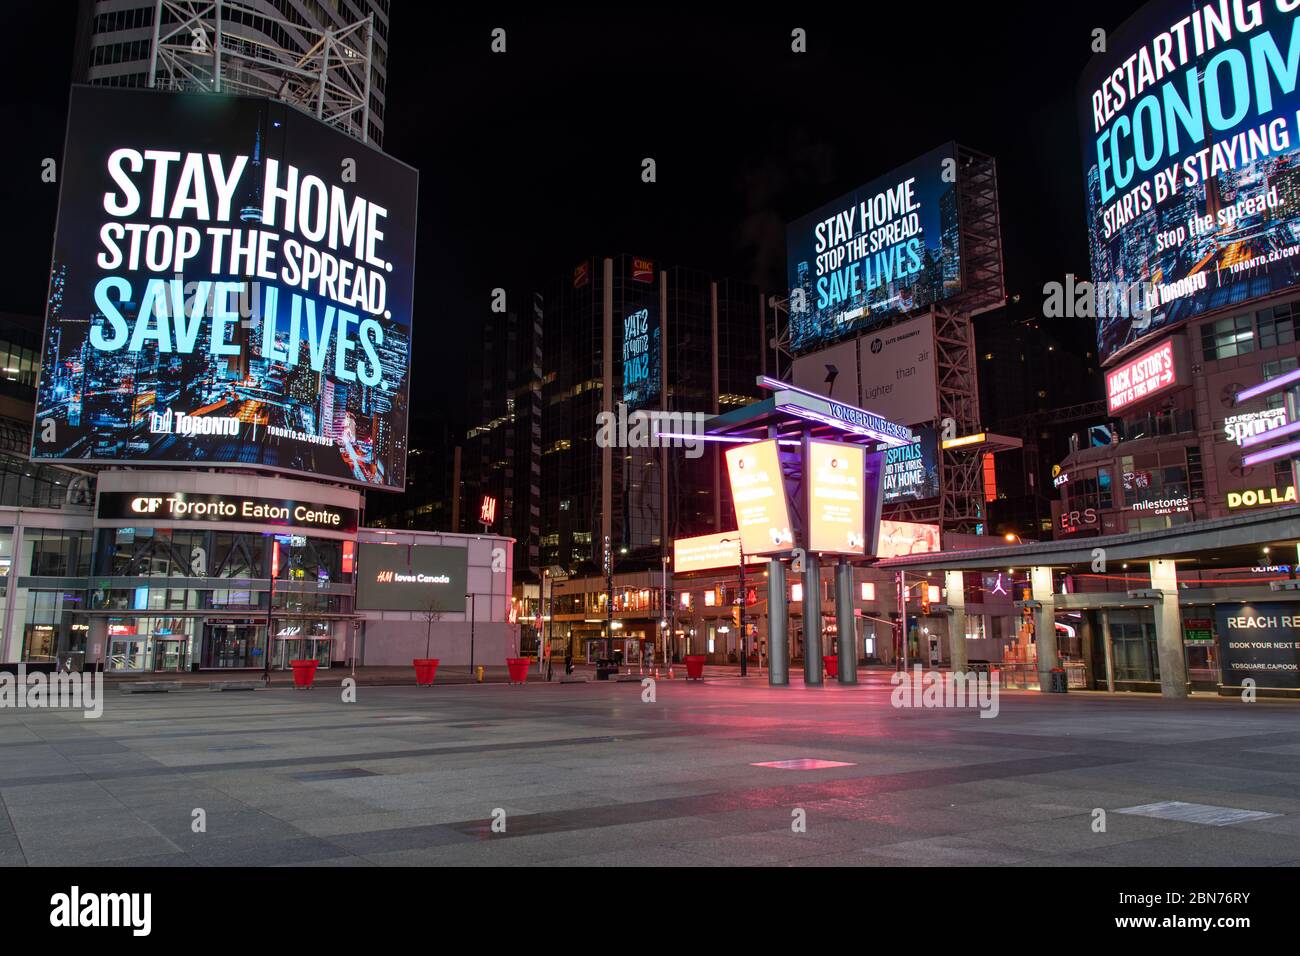 Toronto’s Young-Dundas Square empty at empty, with digital billboards reading “Stay home. Stop the spread. Save lives.” during the COVID-19 pandemic. Stock Photo